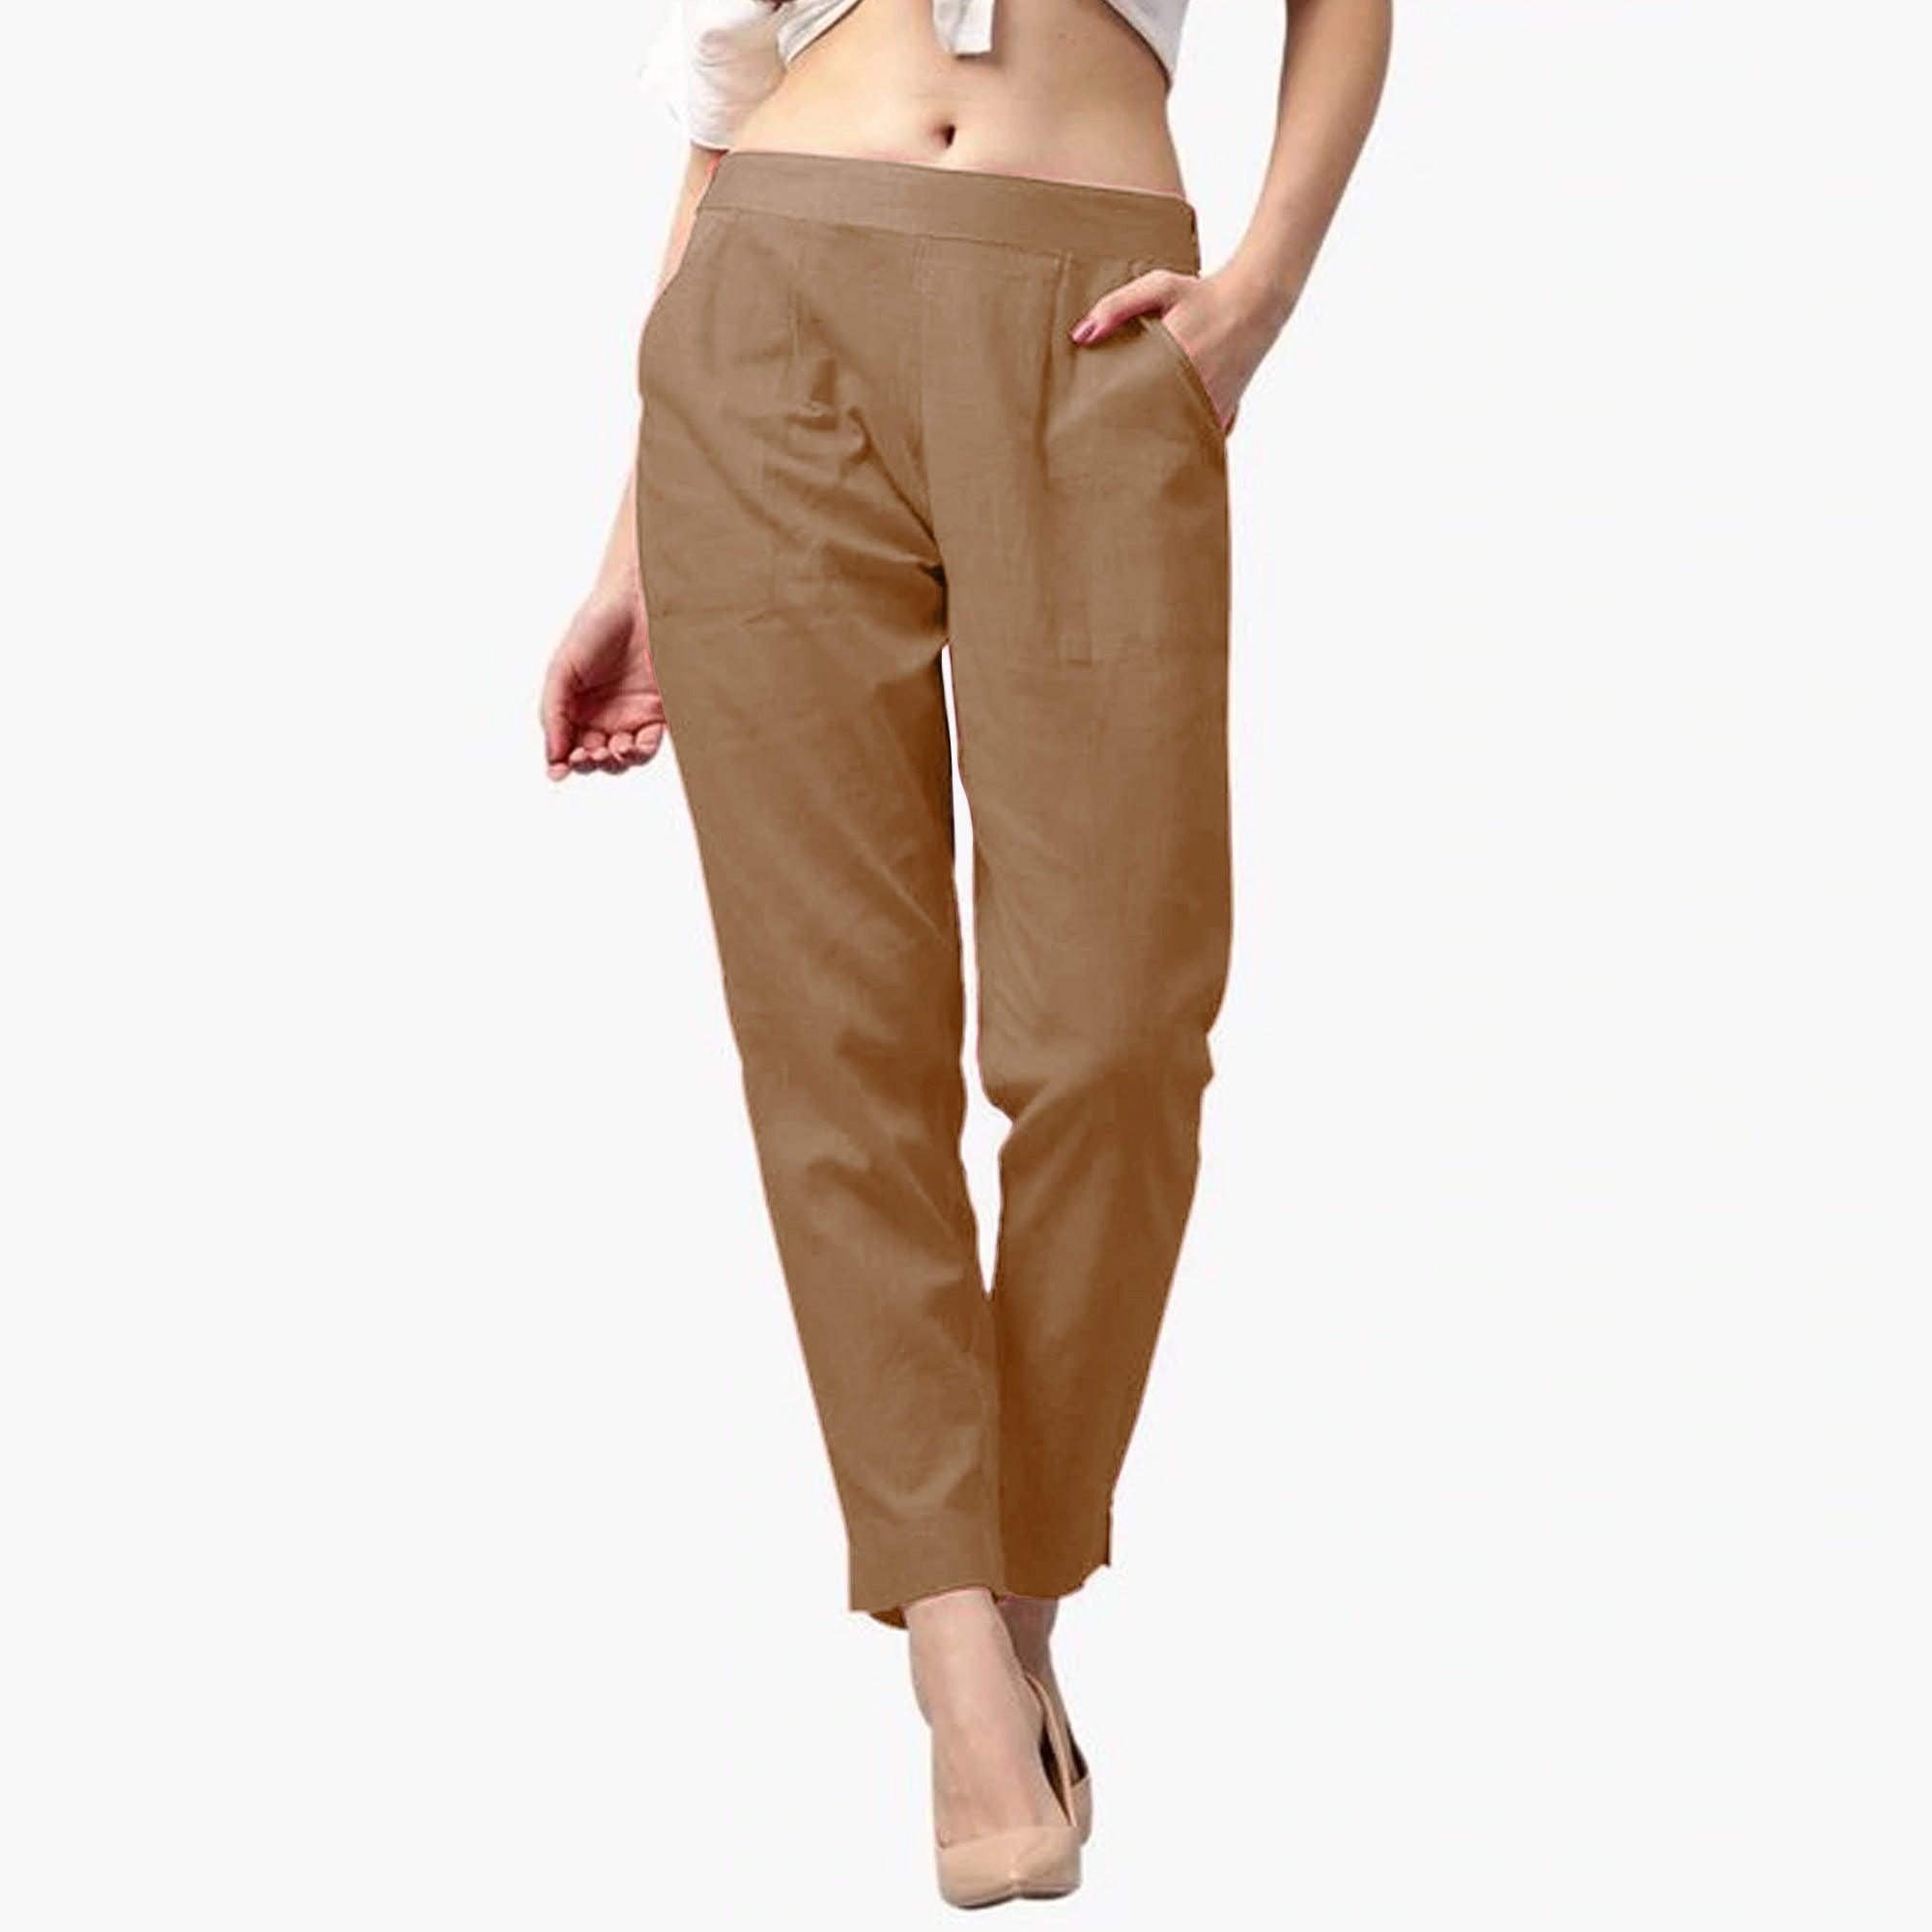 Staring Beige Colored Casual Wear Cotton Pant - Peachmode